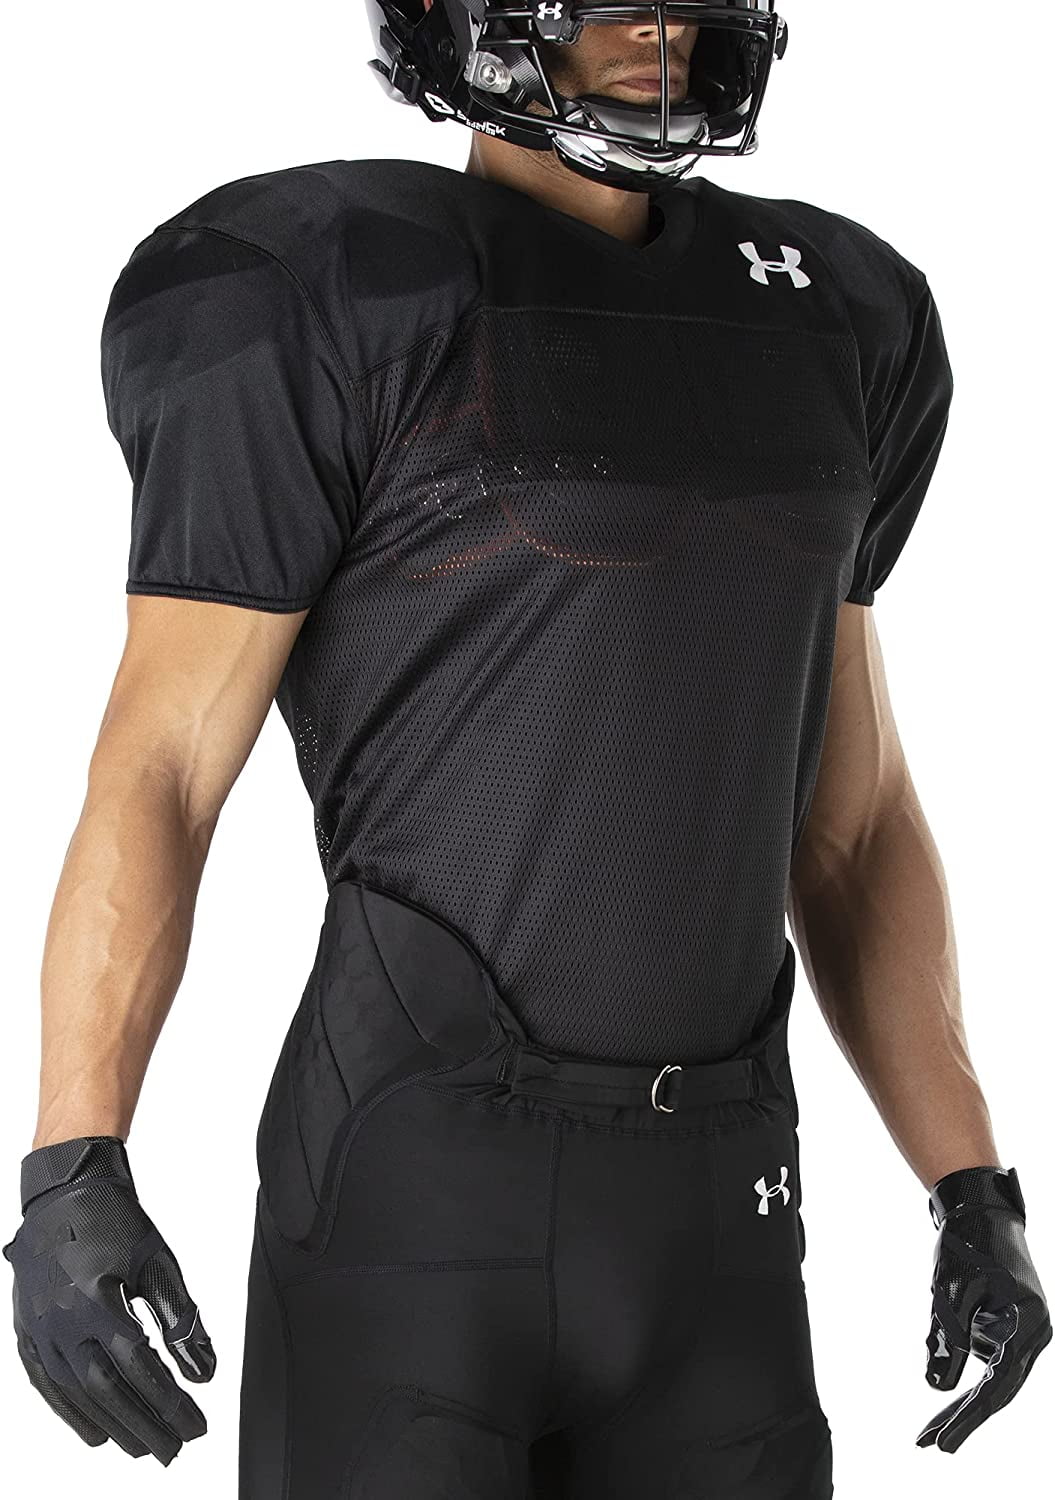 Under Armour Boys' Football Jersey Black Youth  Assorted Sizes NEW 